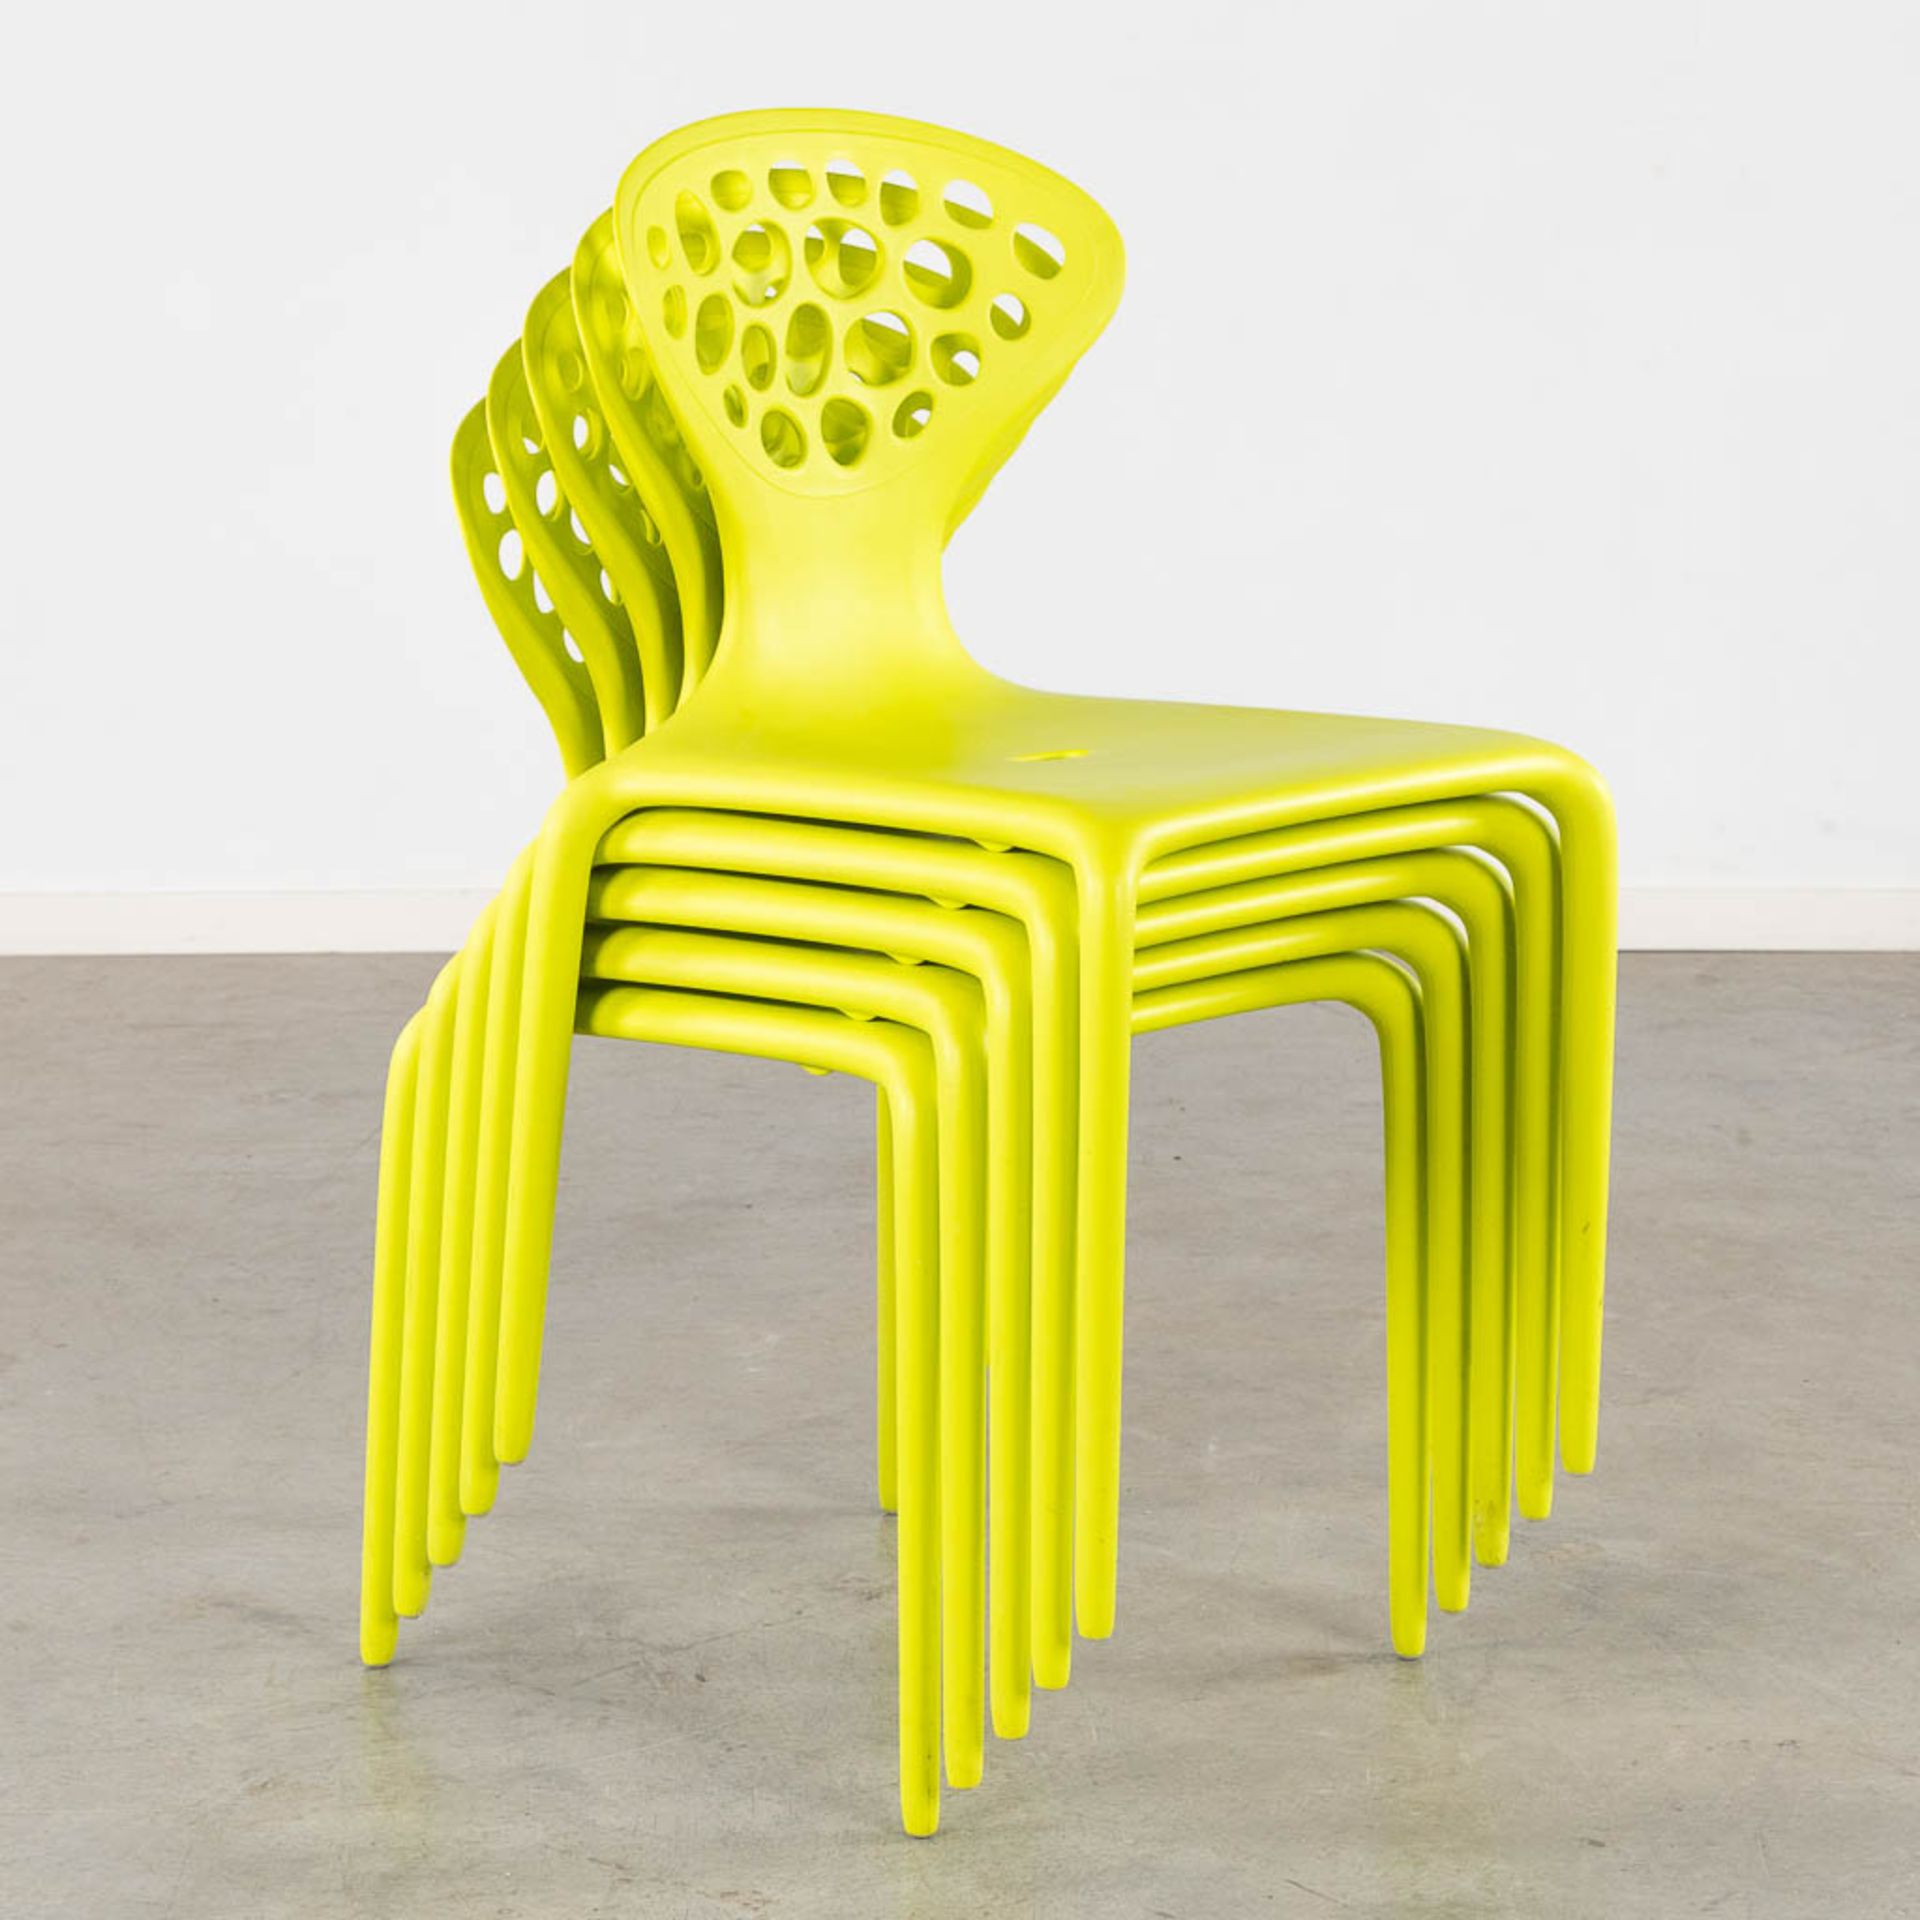 Ross LOVEGROVE (1958) 'Supernatural Chairs' (2005) for Morosso, Italy. (L:48 x W:48 x H:82 cm) - Image 11 of 11